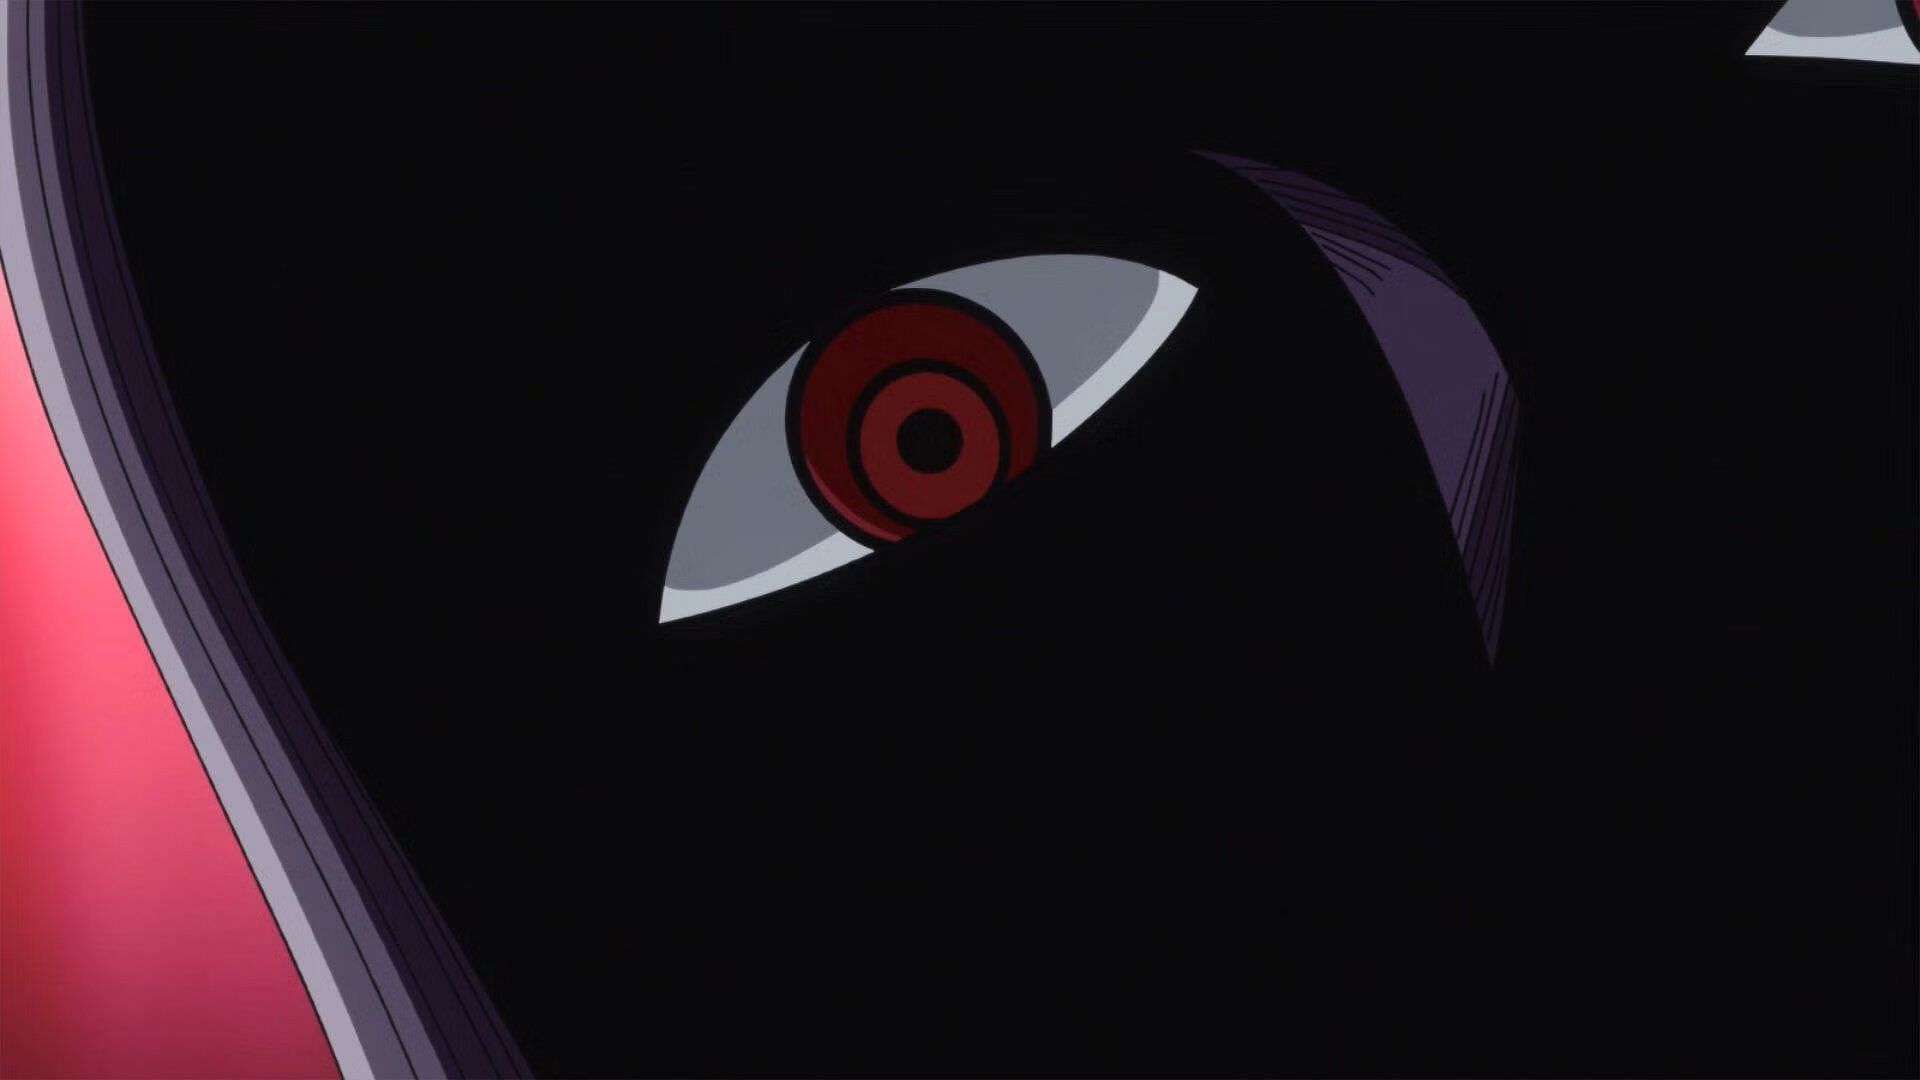 Imu as shown in the One Piece anime (Image via Toei Animation).